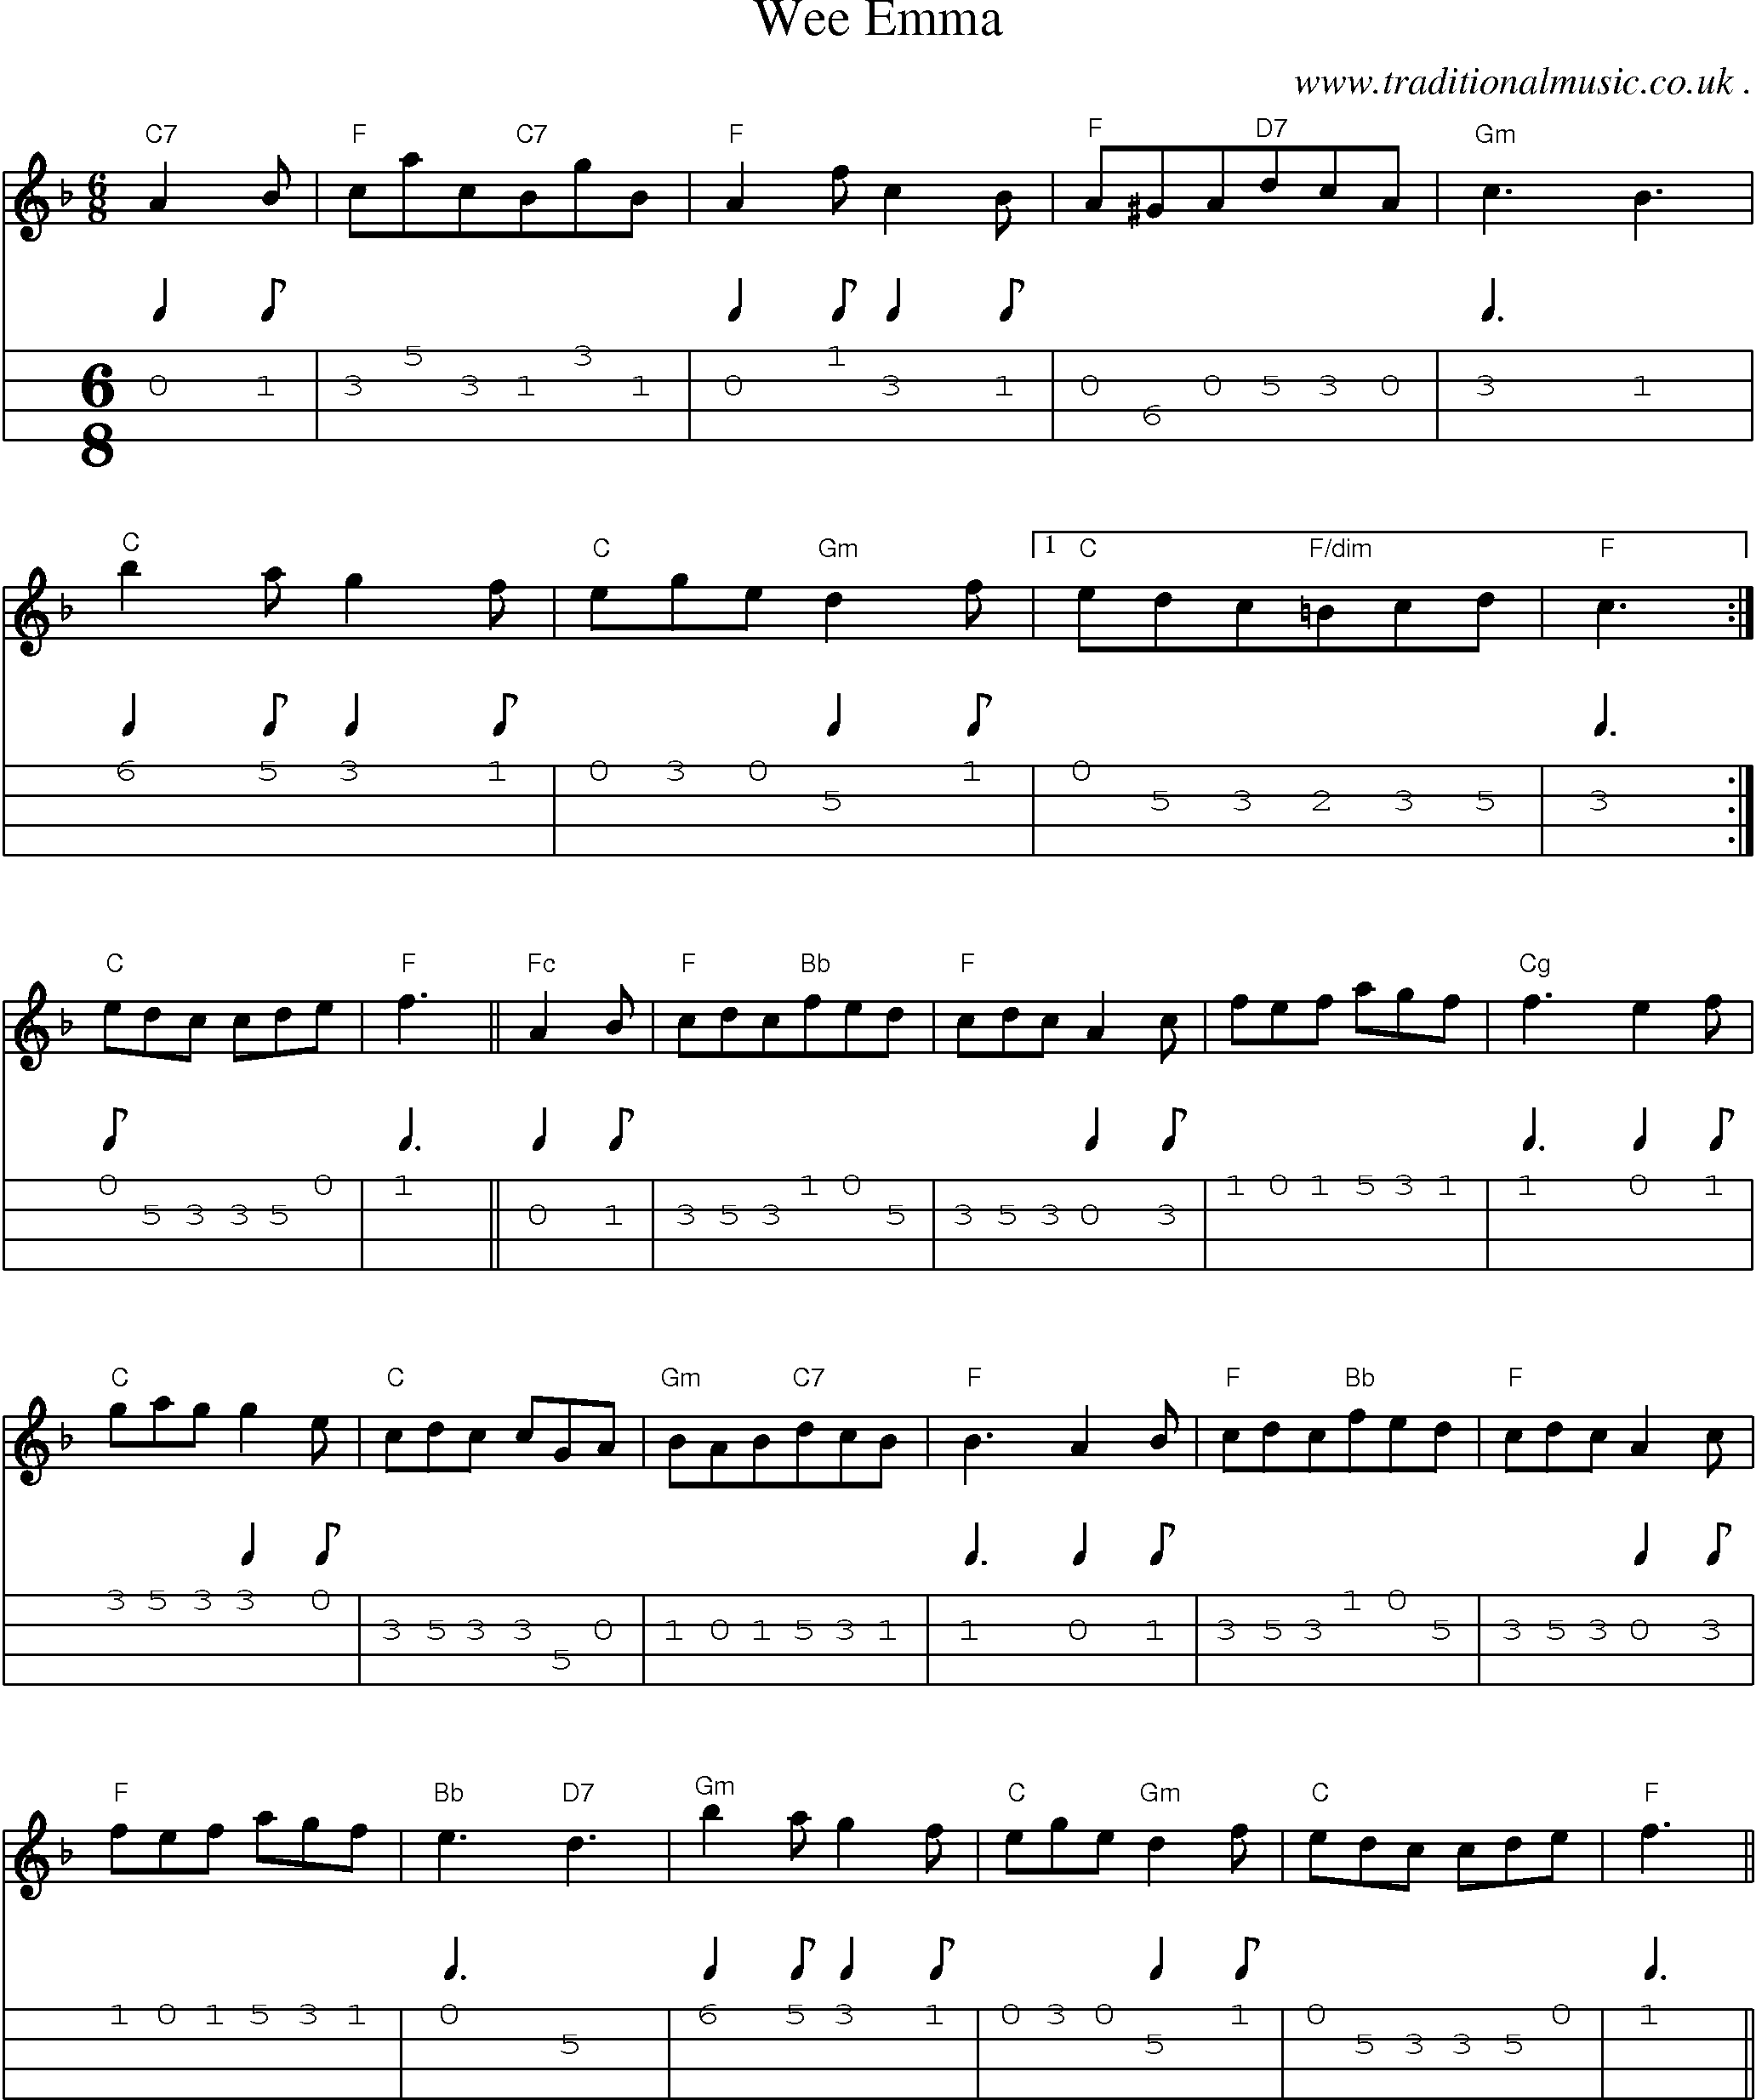 Sheet-Music and Mandolin Tabs for Wee Emma